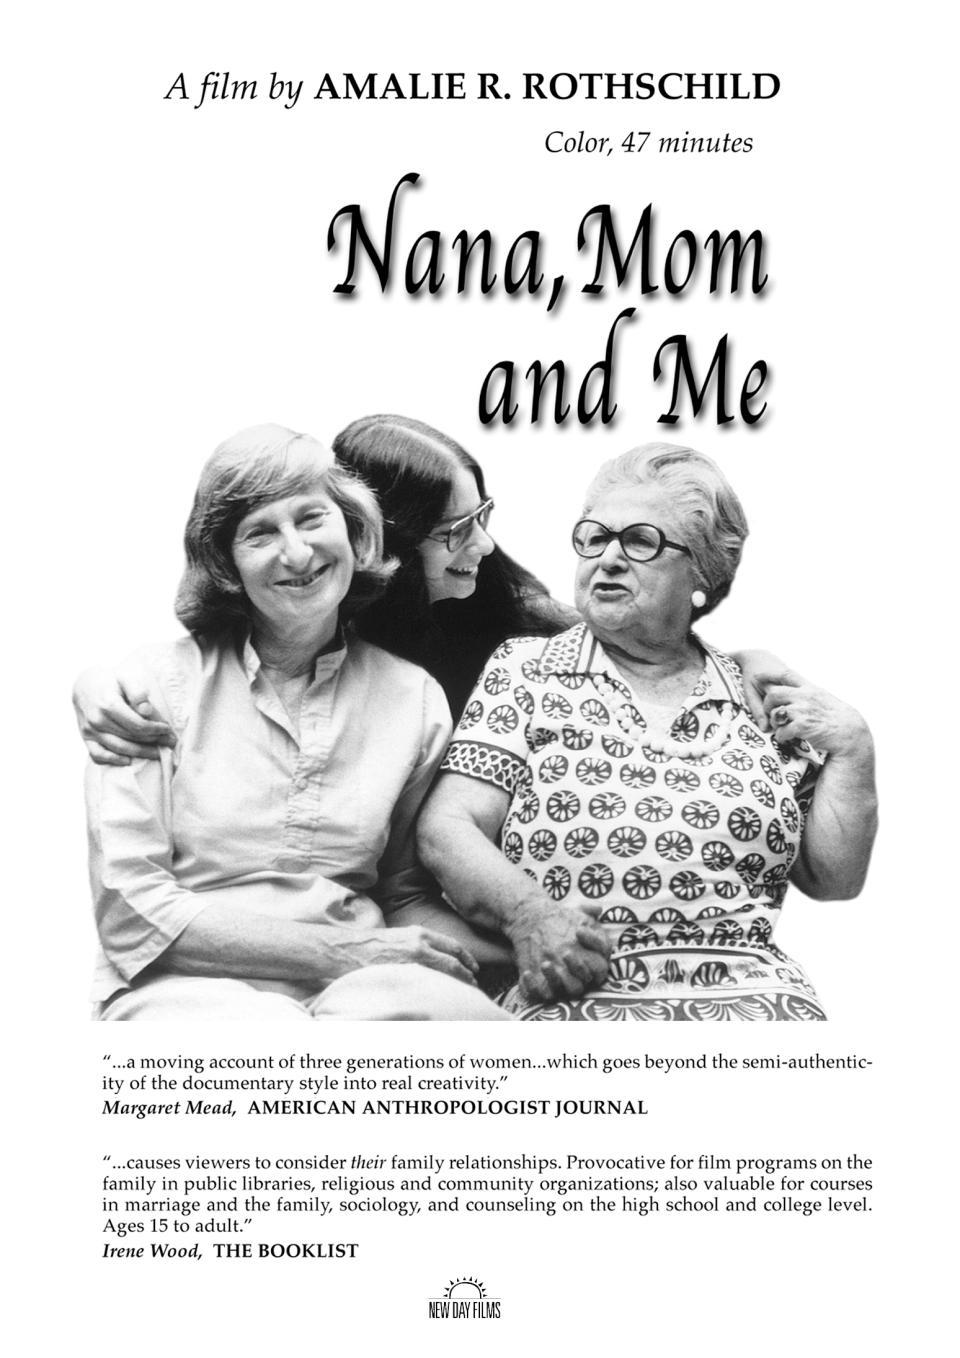 Nana, Mom and Me poster with two awards and review quotations.